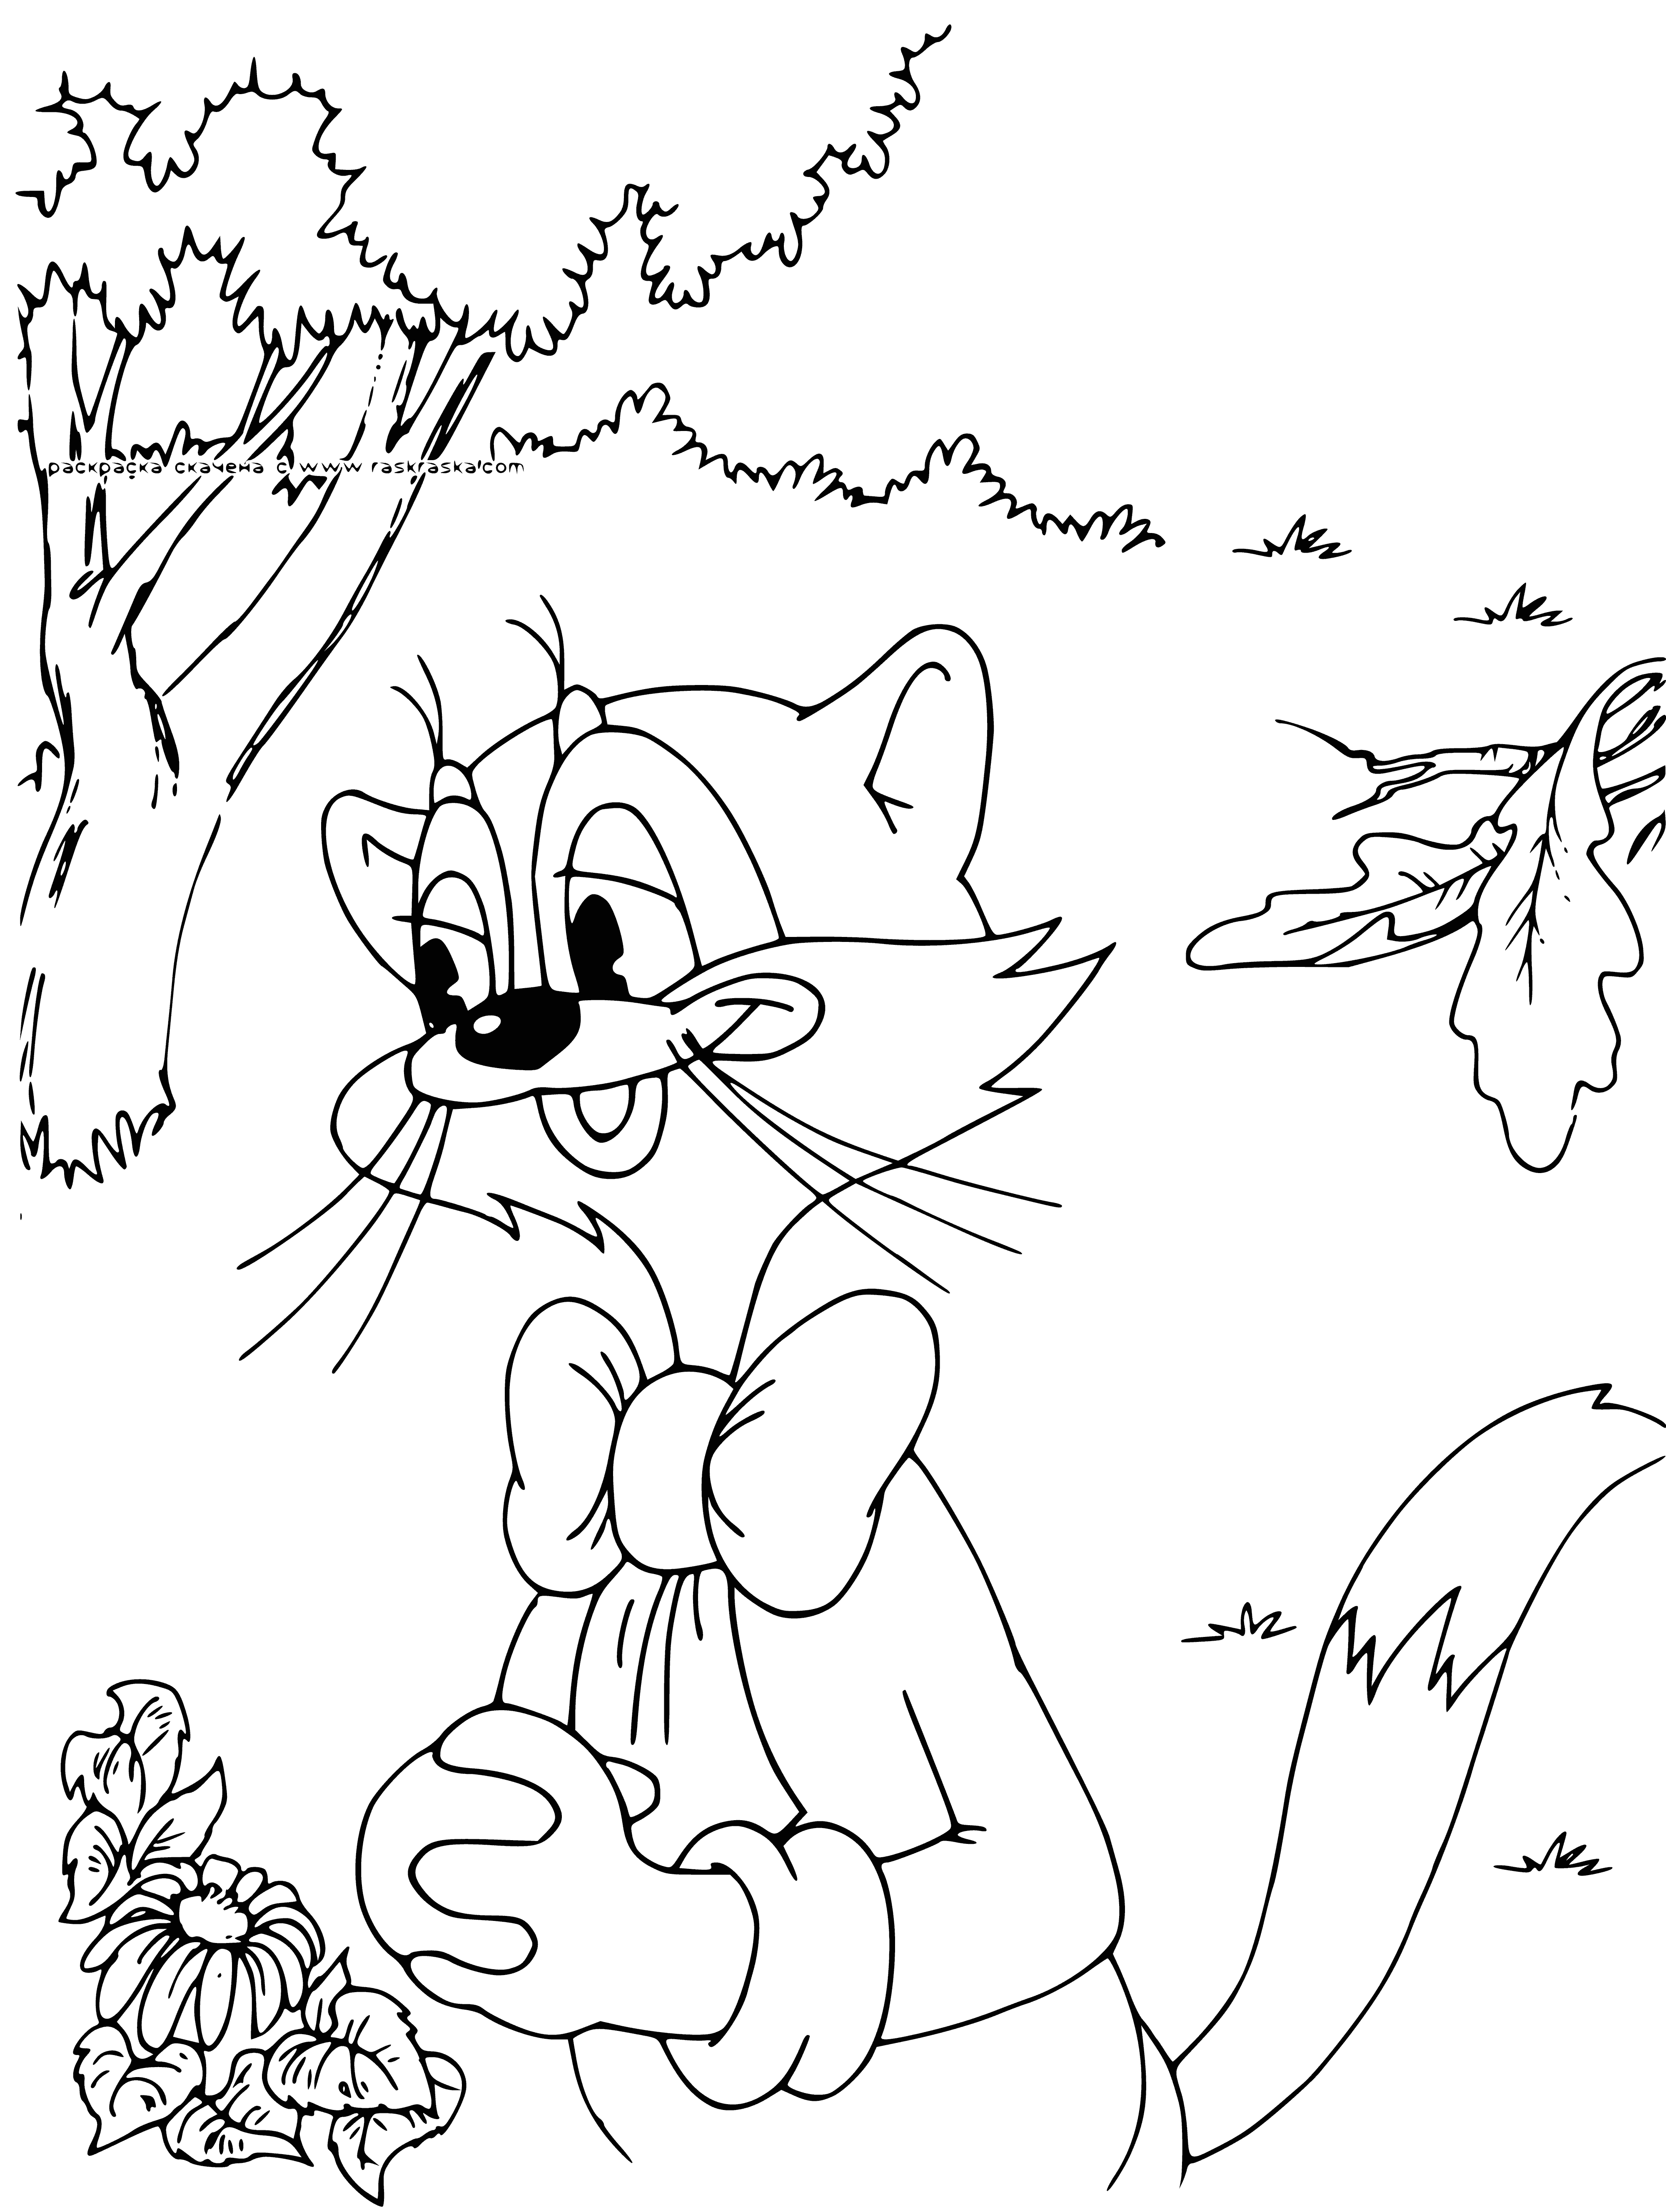 coloring page: Leopold the Cat has made new friends and they are all having fun, running & playing games together.